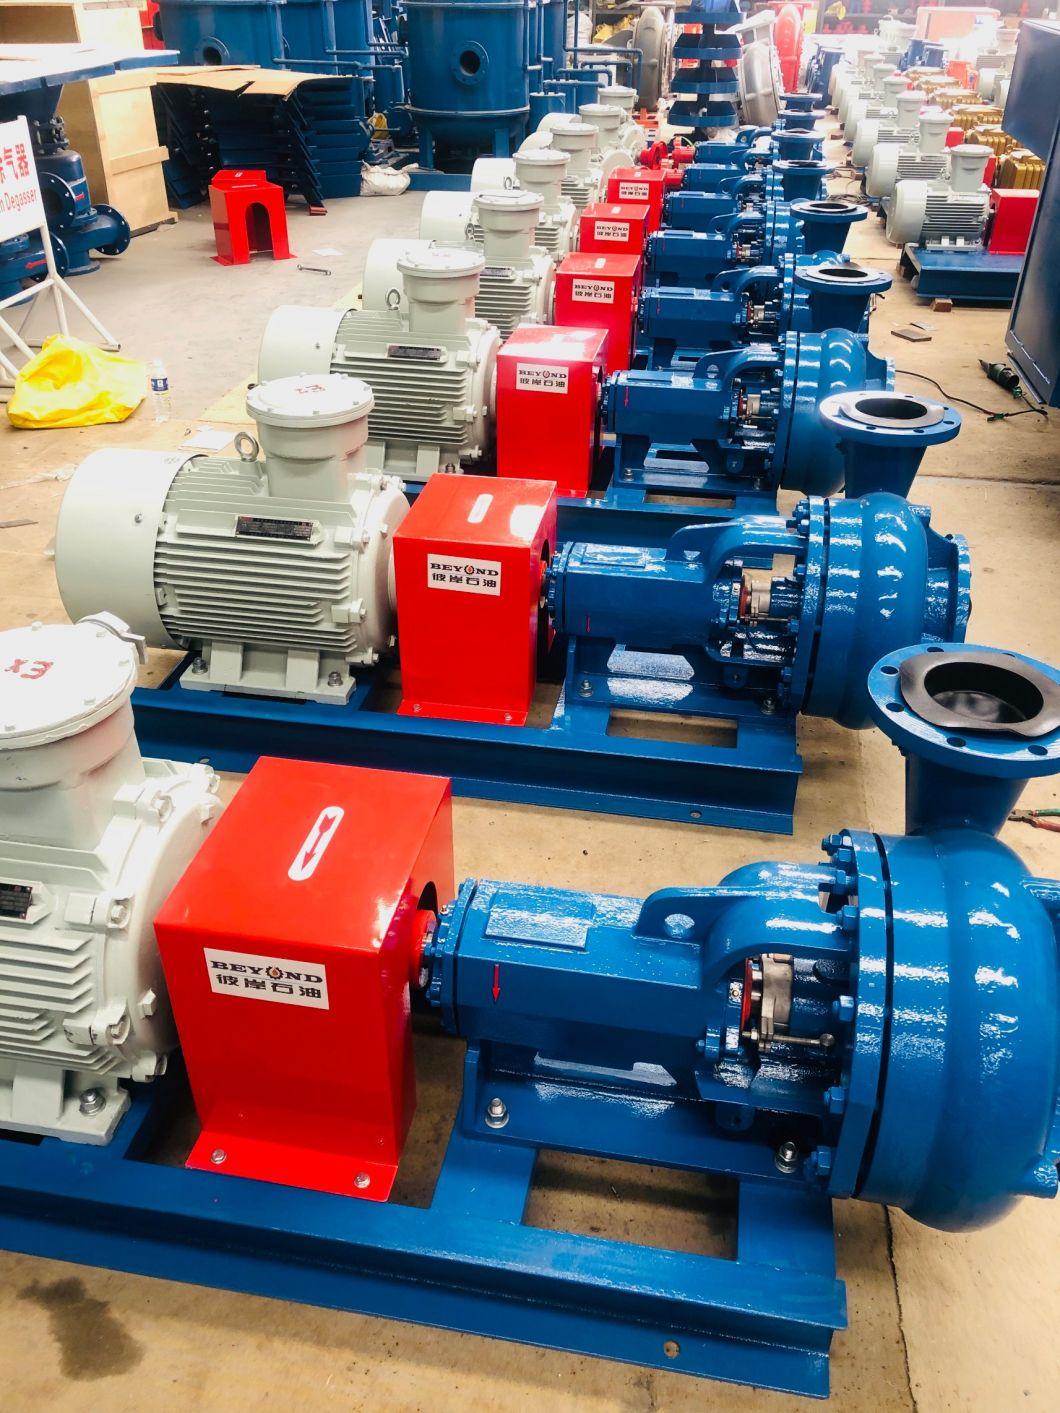 15kw High-Quality Solids Control Equipment Sand Pump